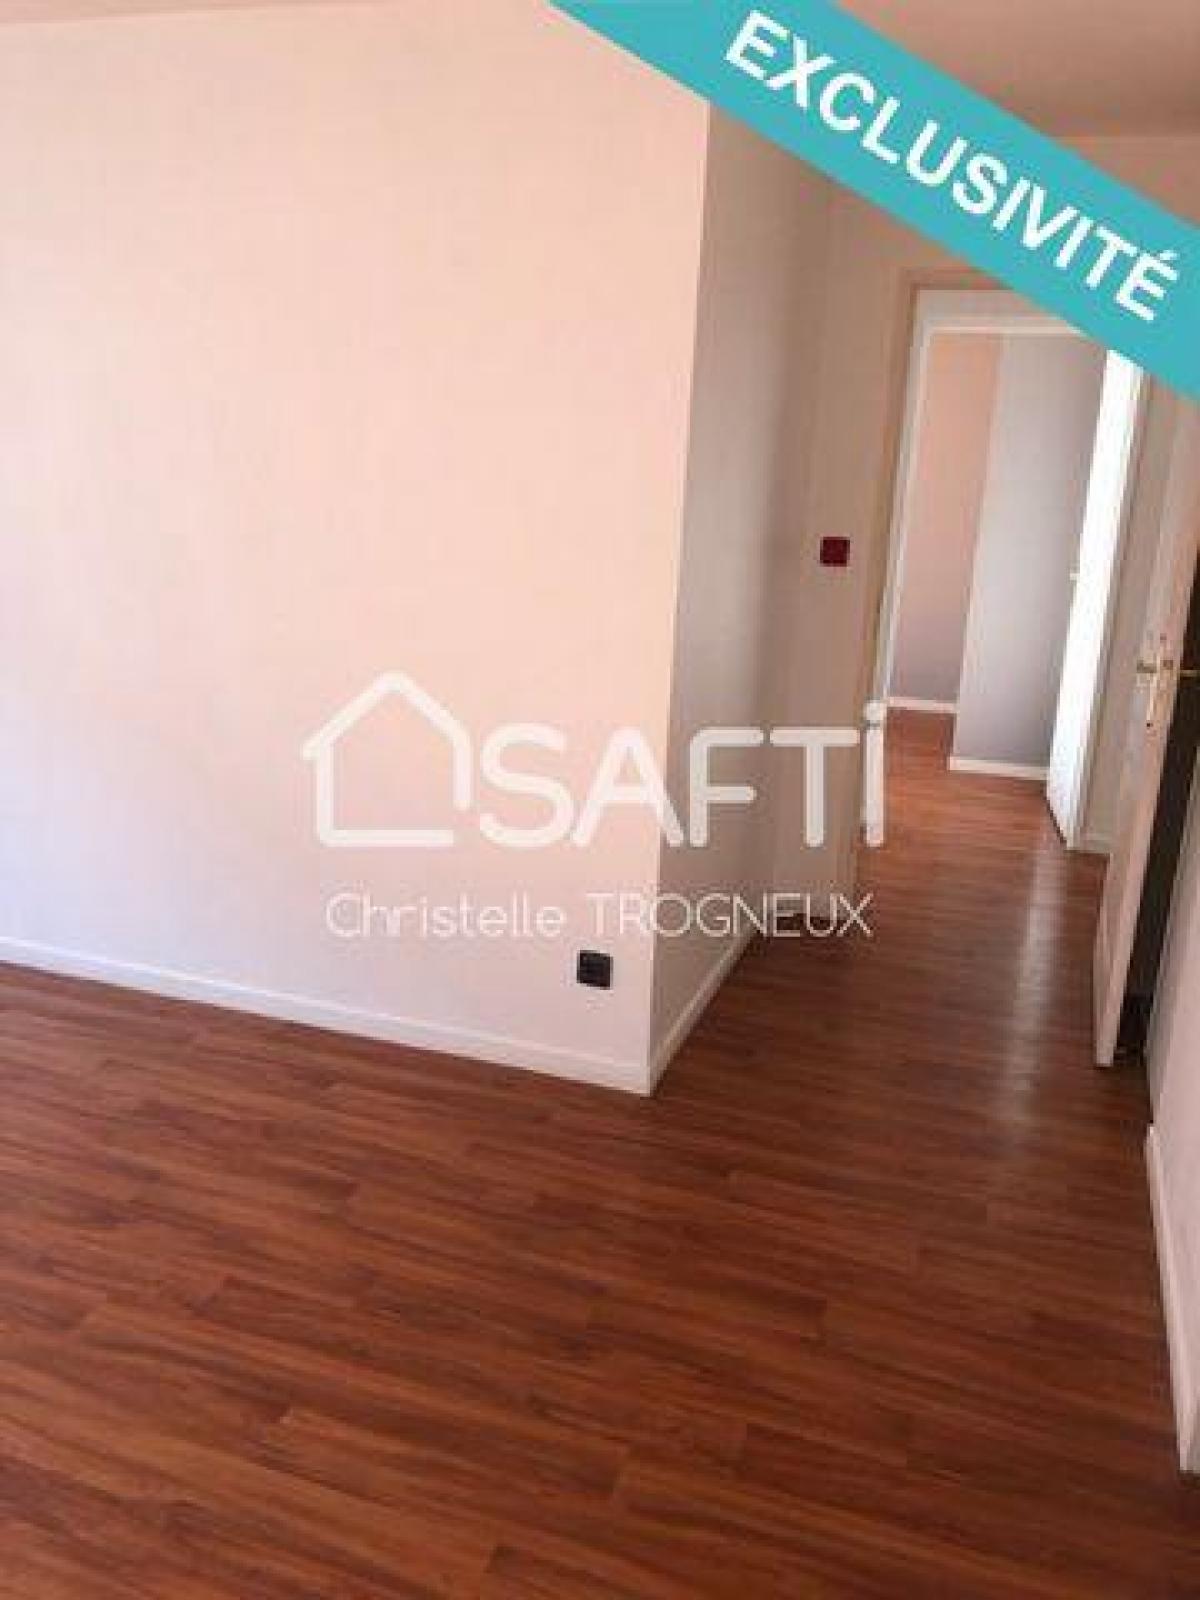 Picture of Apartment For Sale in Longueau, Picardie, France